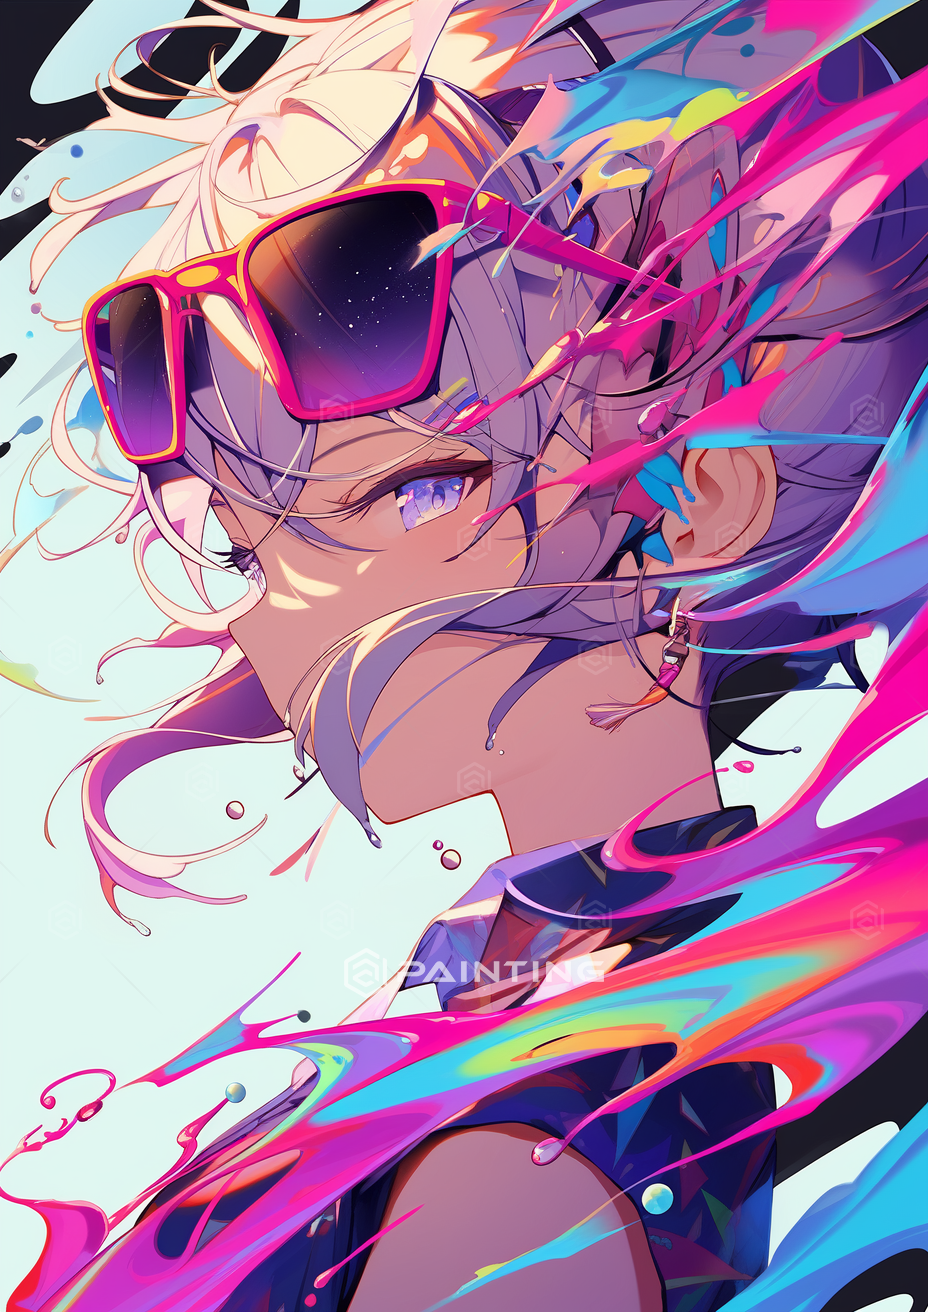 bright_anime_background_with_a_girl_wearing_sunglasses_in_t_8e069077-4774-4942-a45b-873b4de420e2.png